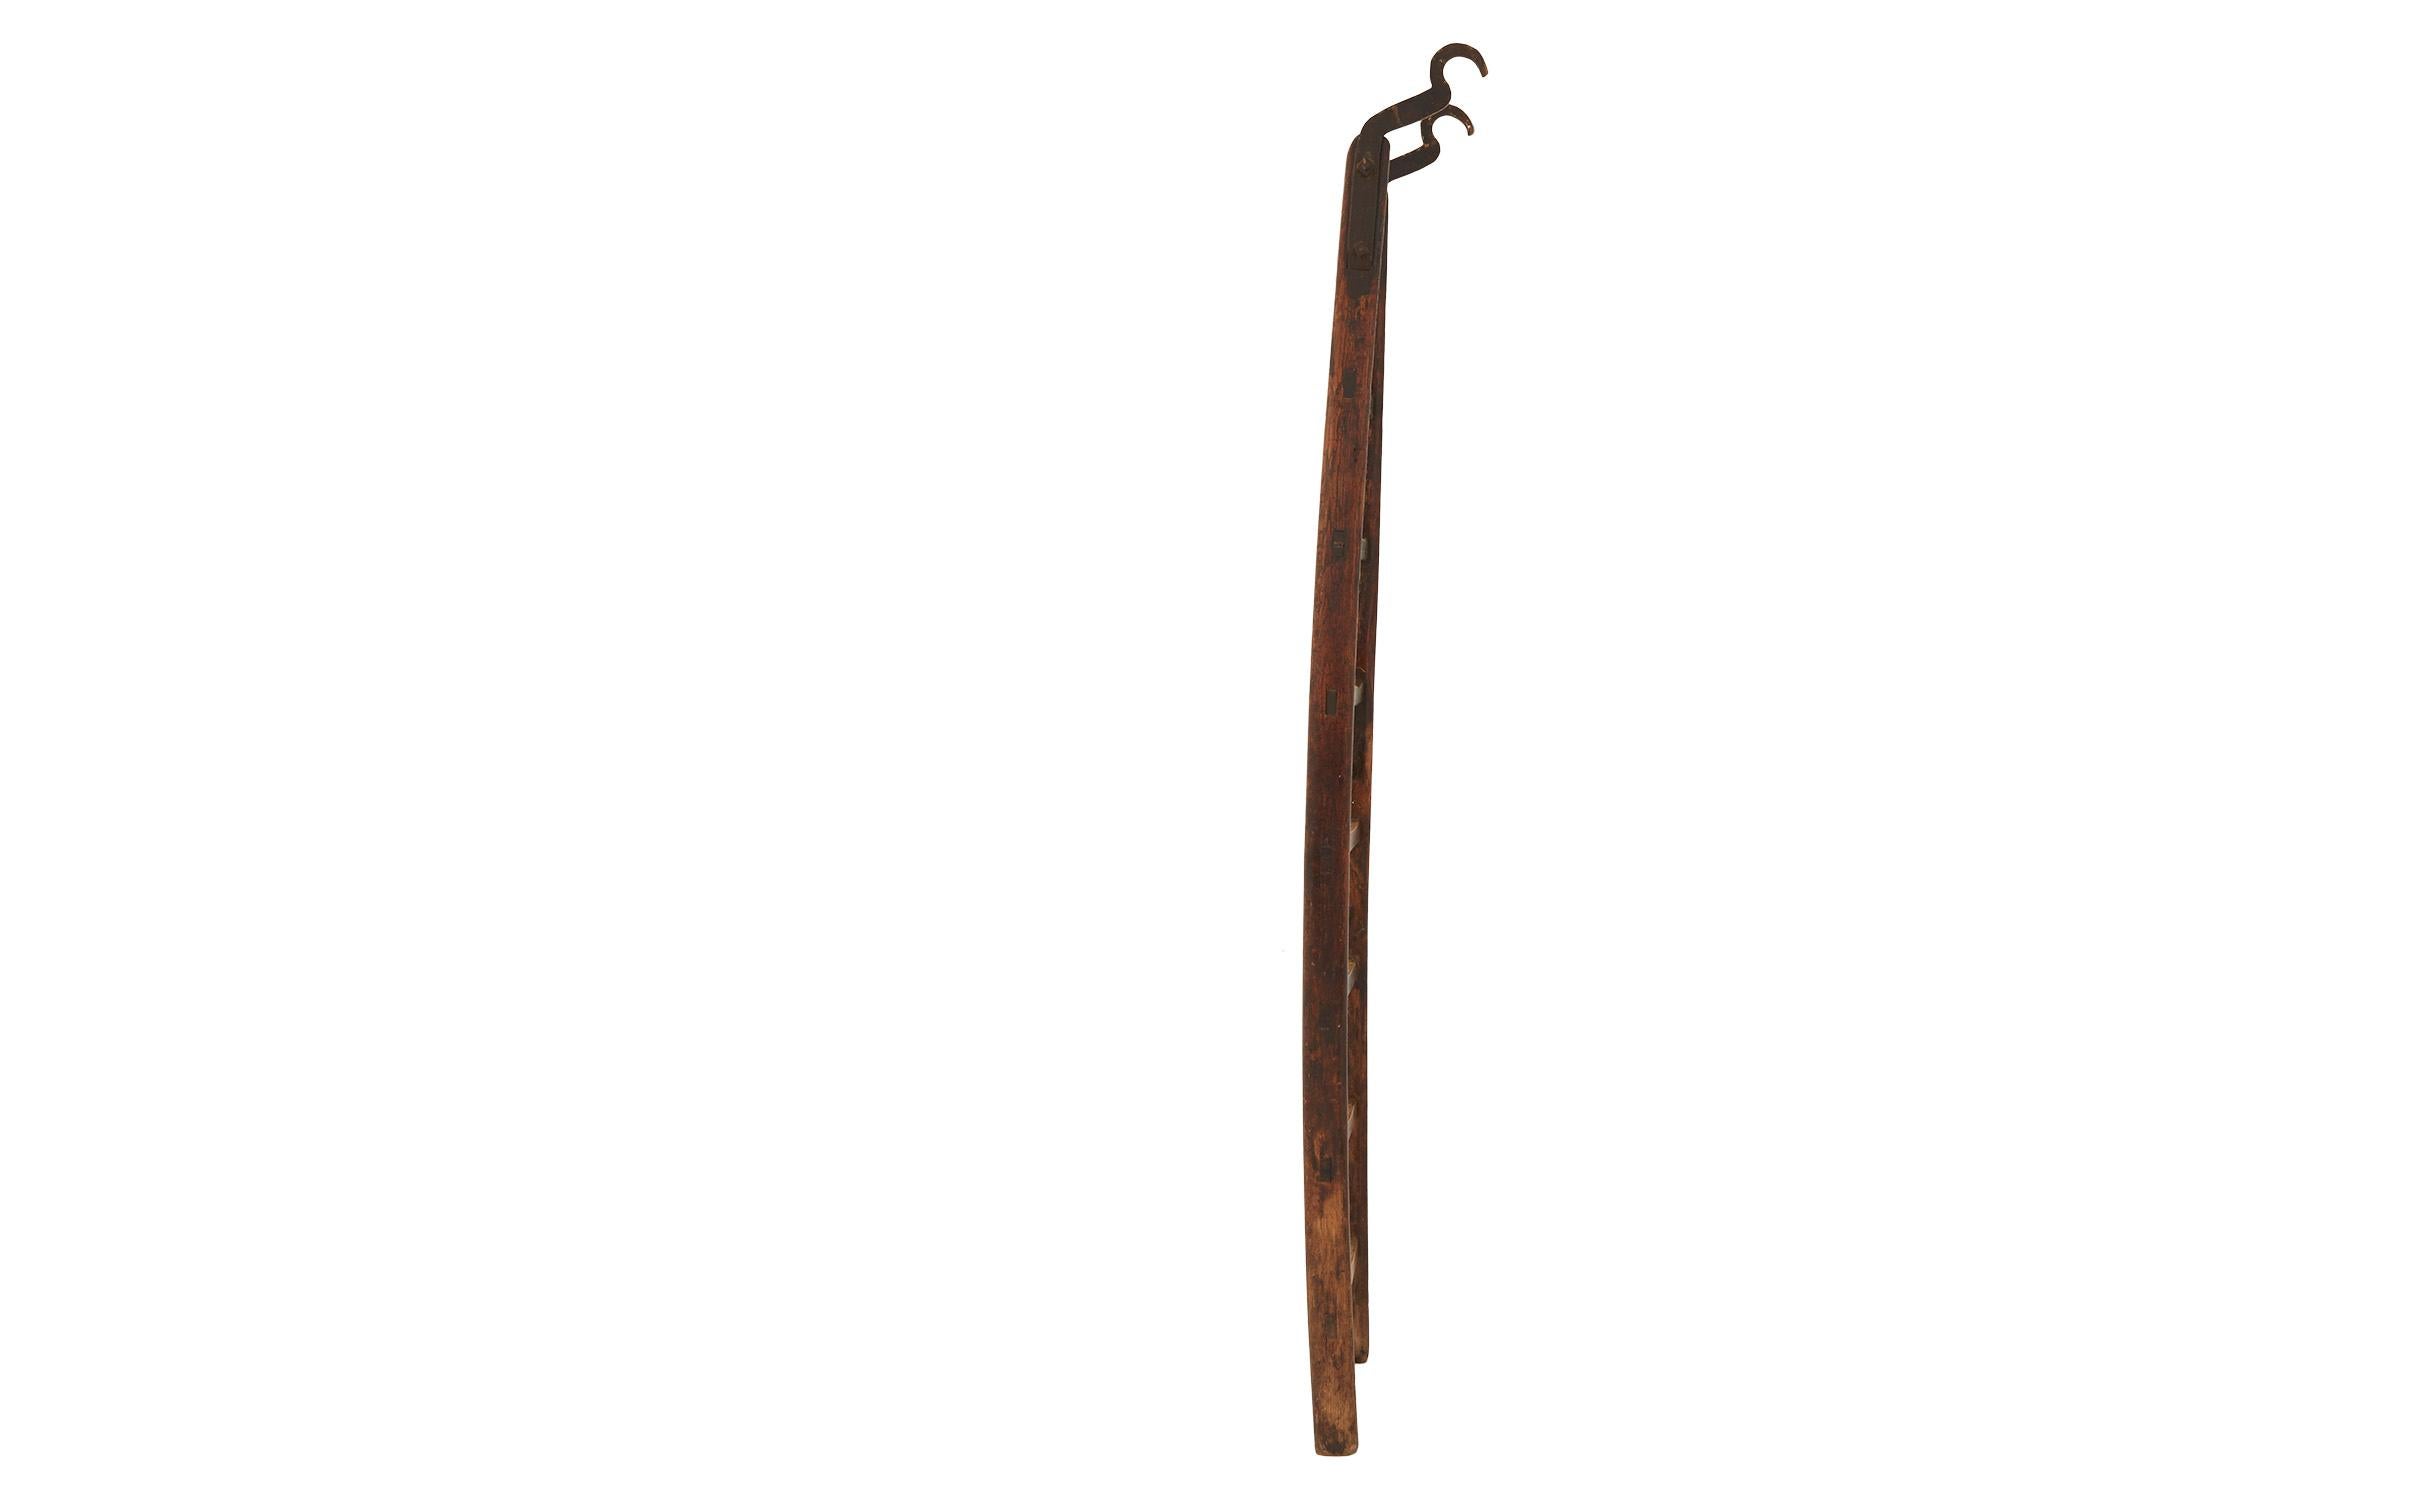 • Patinated wood finish
• Iron hooks
• Early 20th century
• Spain
• Measures: 17